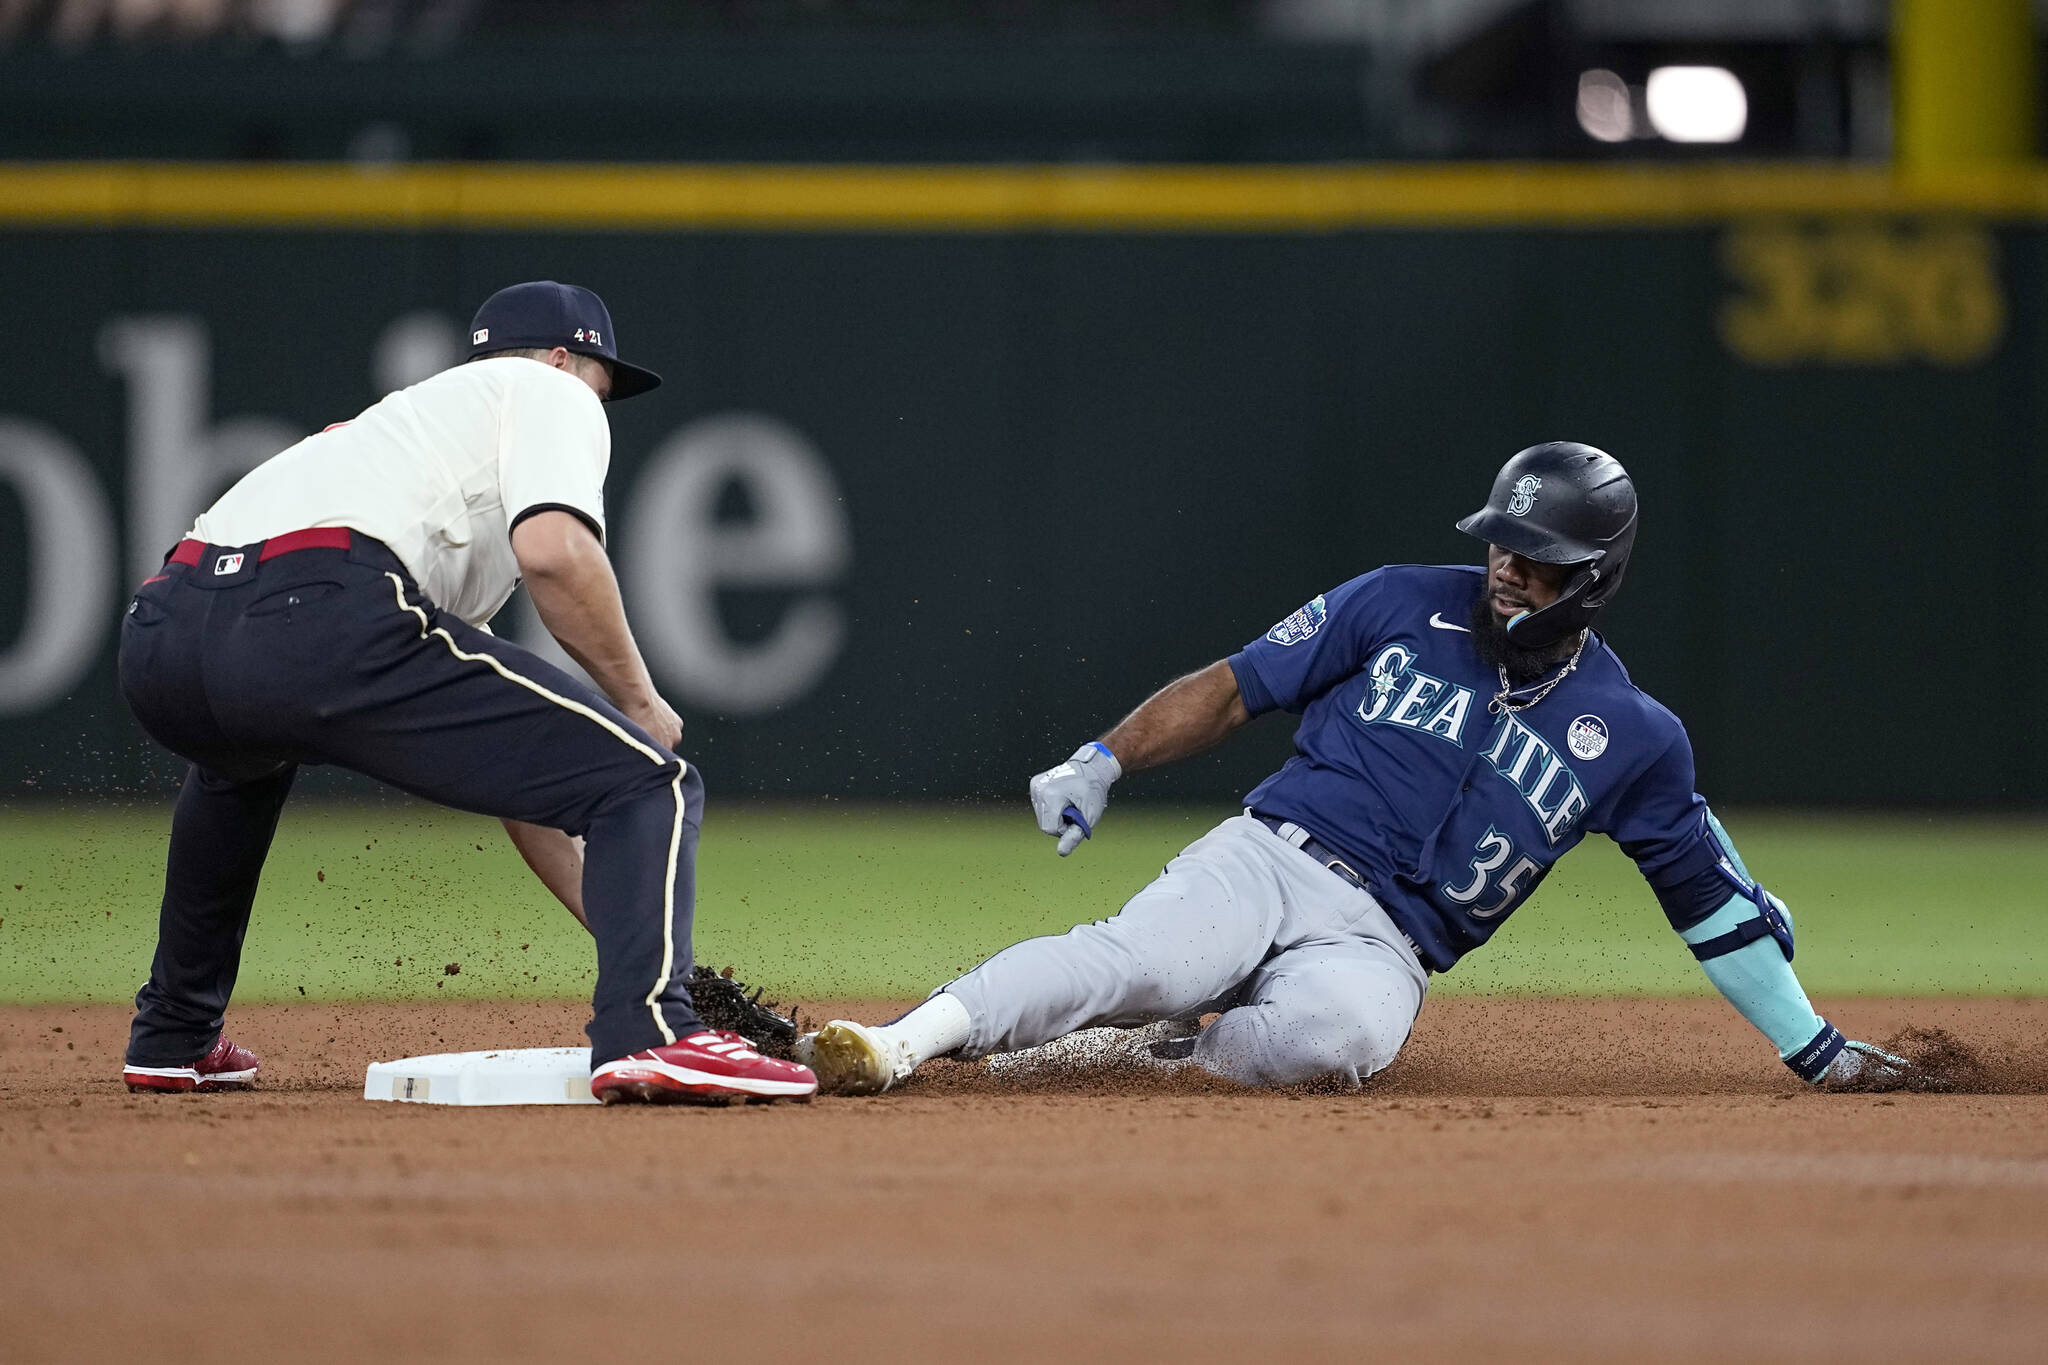 Rangers shortstop Corey Seager (left) reaches down to tag out the Mariners’ Teoscar Hernande, who was trying to stretch a single into a double during the third inning of a game Friday in Arlington, Texas. (AP Photo/Tony Gutierrez)